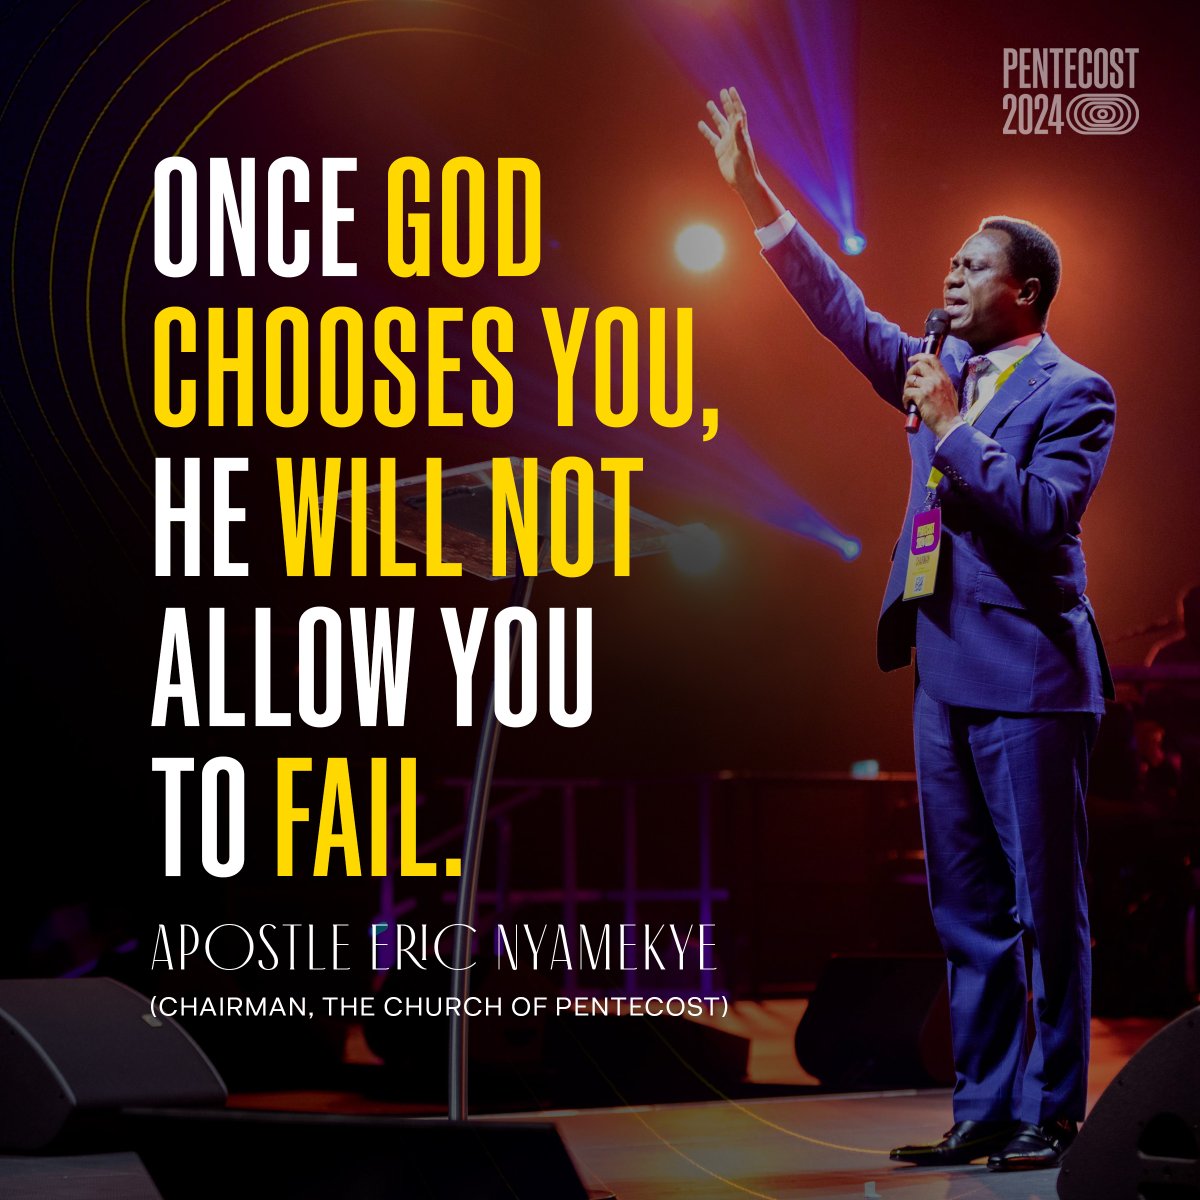 🎯 Once God chooses you, He will not allow you to fail.